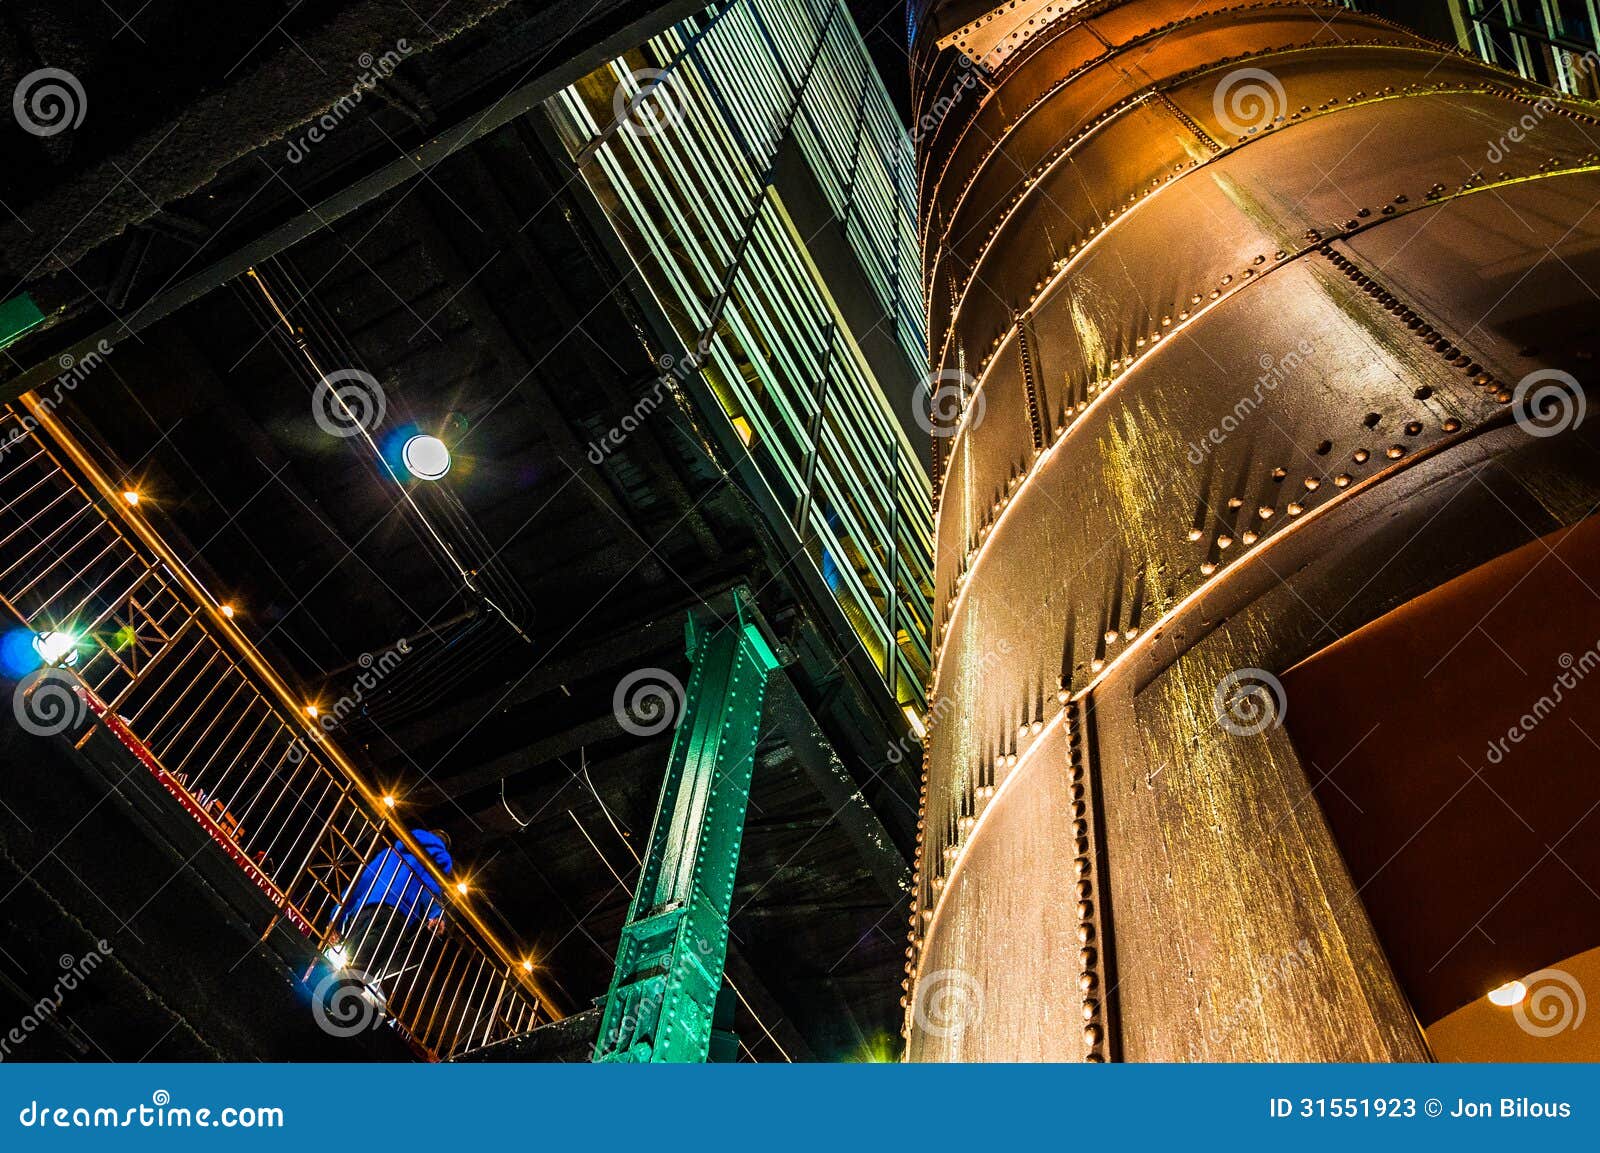 interesting architecture in the powerplant, baltimore, maryland.